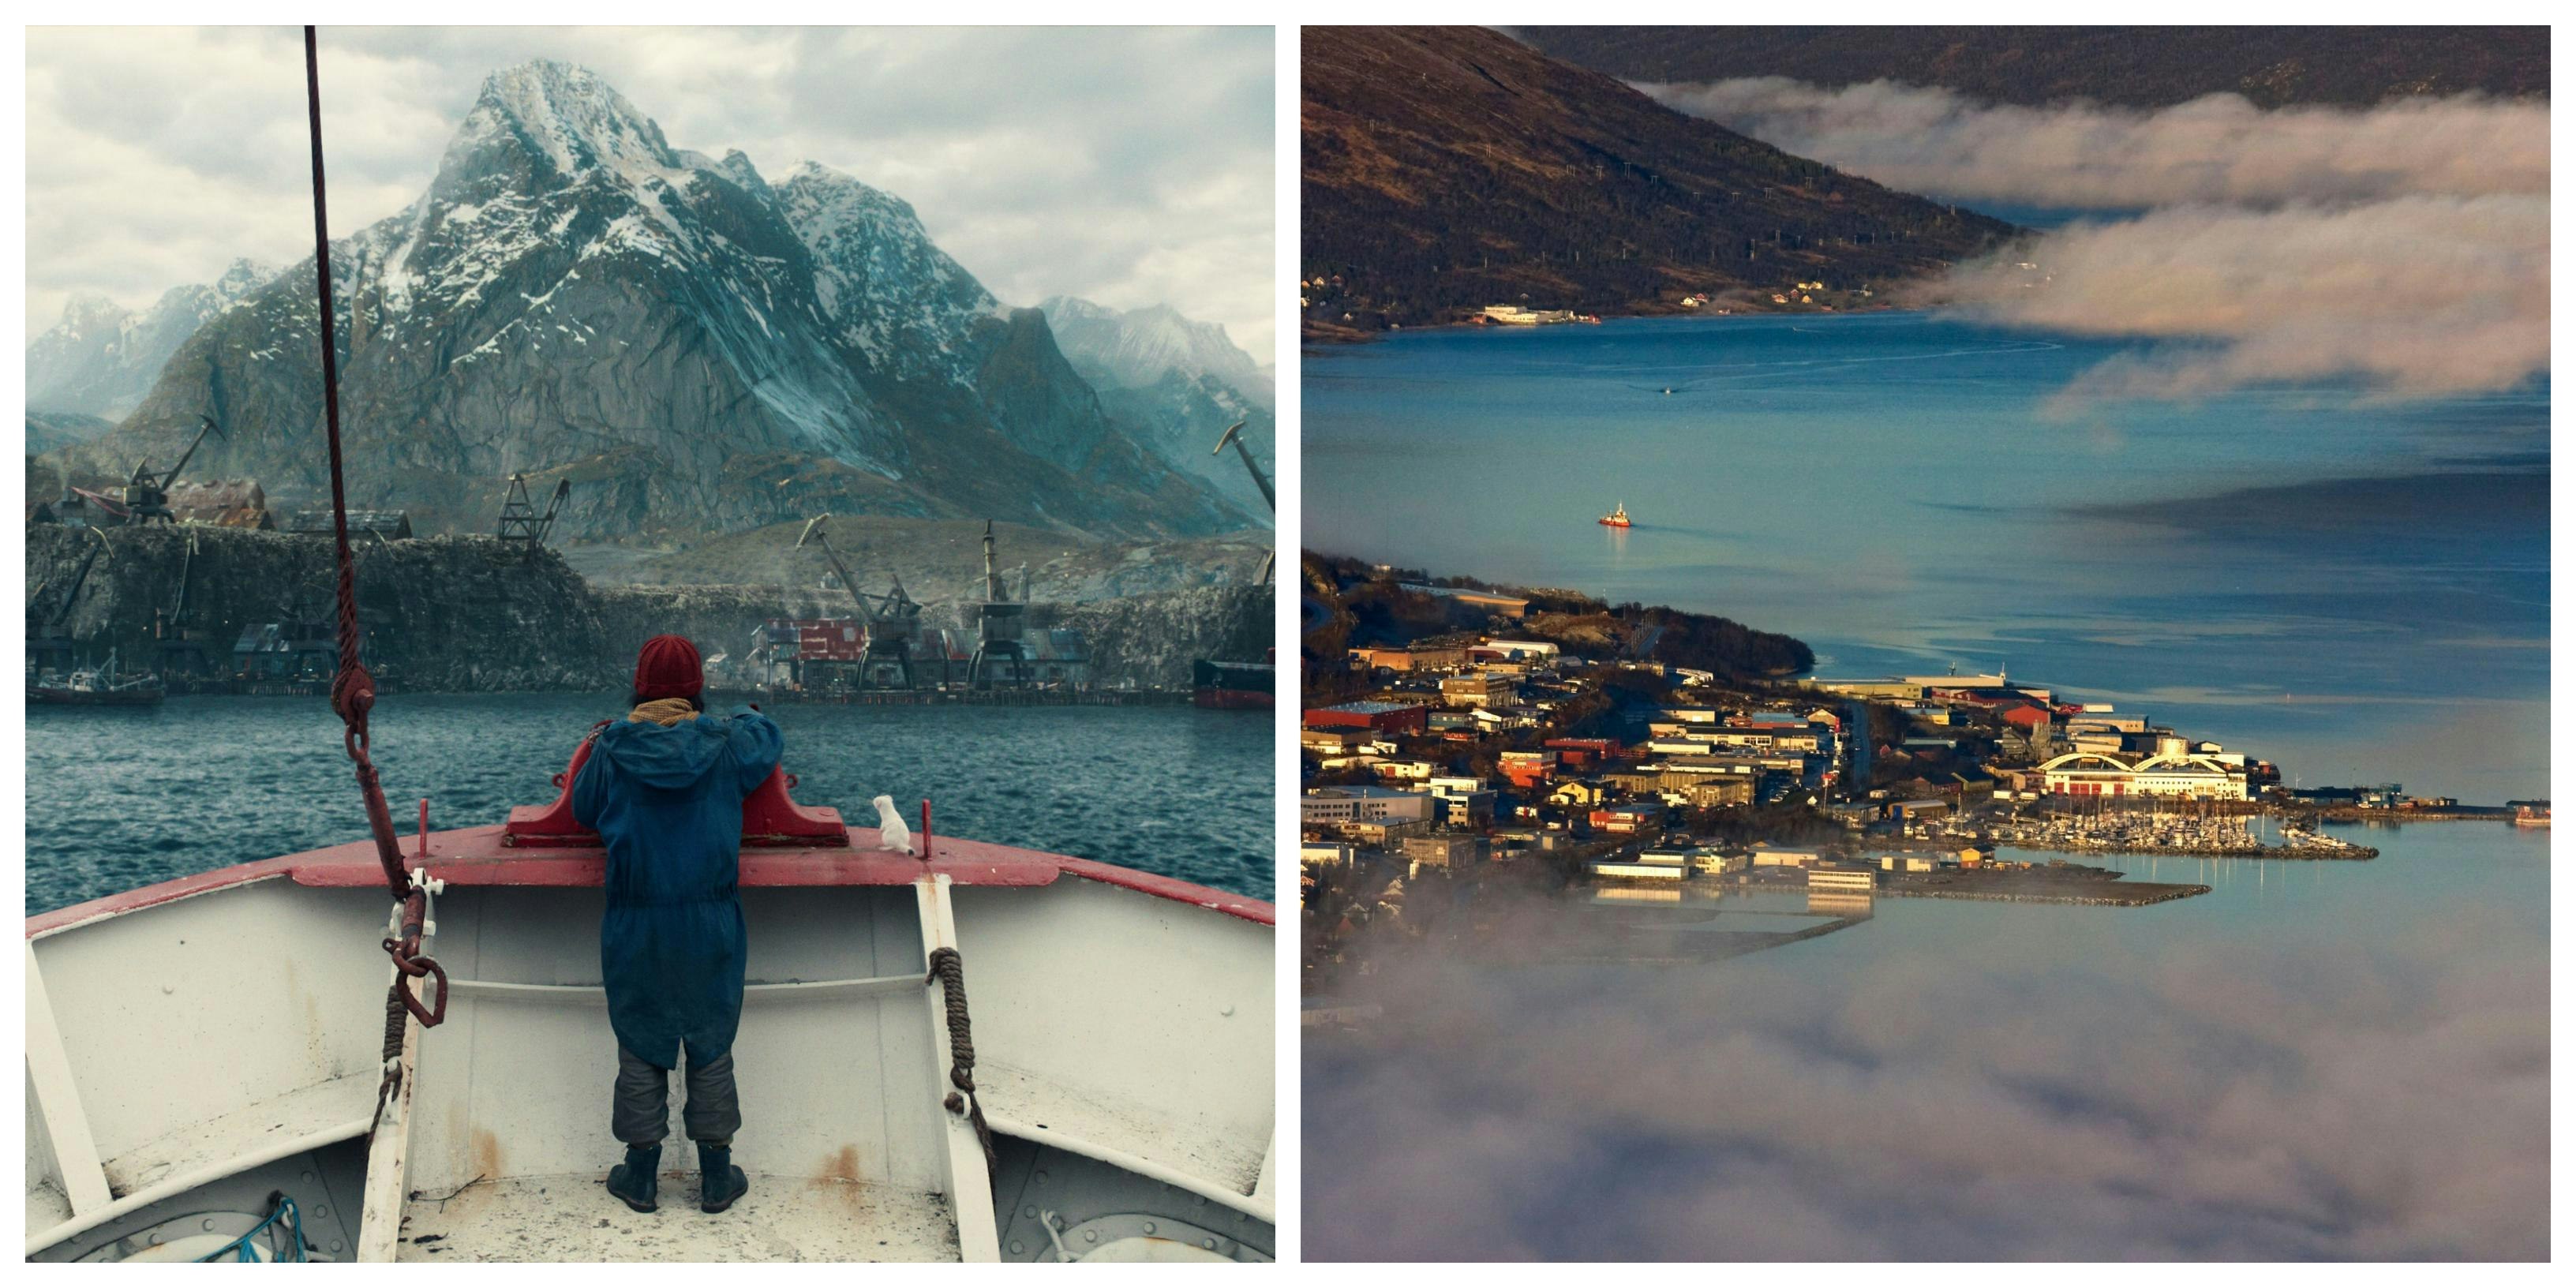 On the left, a scene from His Dark Materials. Lyra is looking out to an arctic town from a boat. On the right an aerial shot of Tromso port.